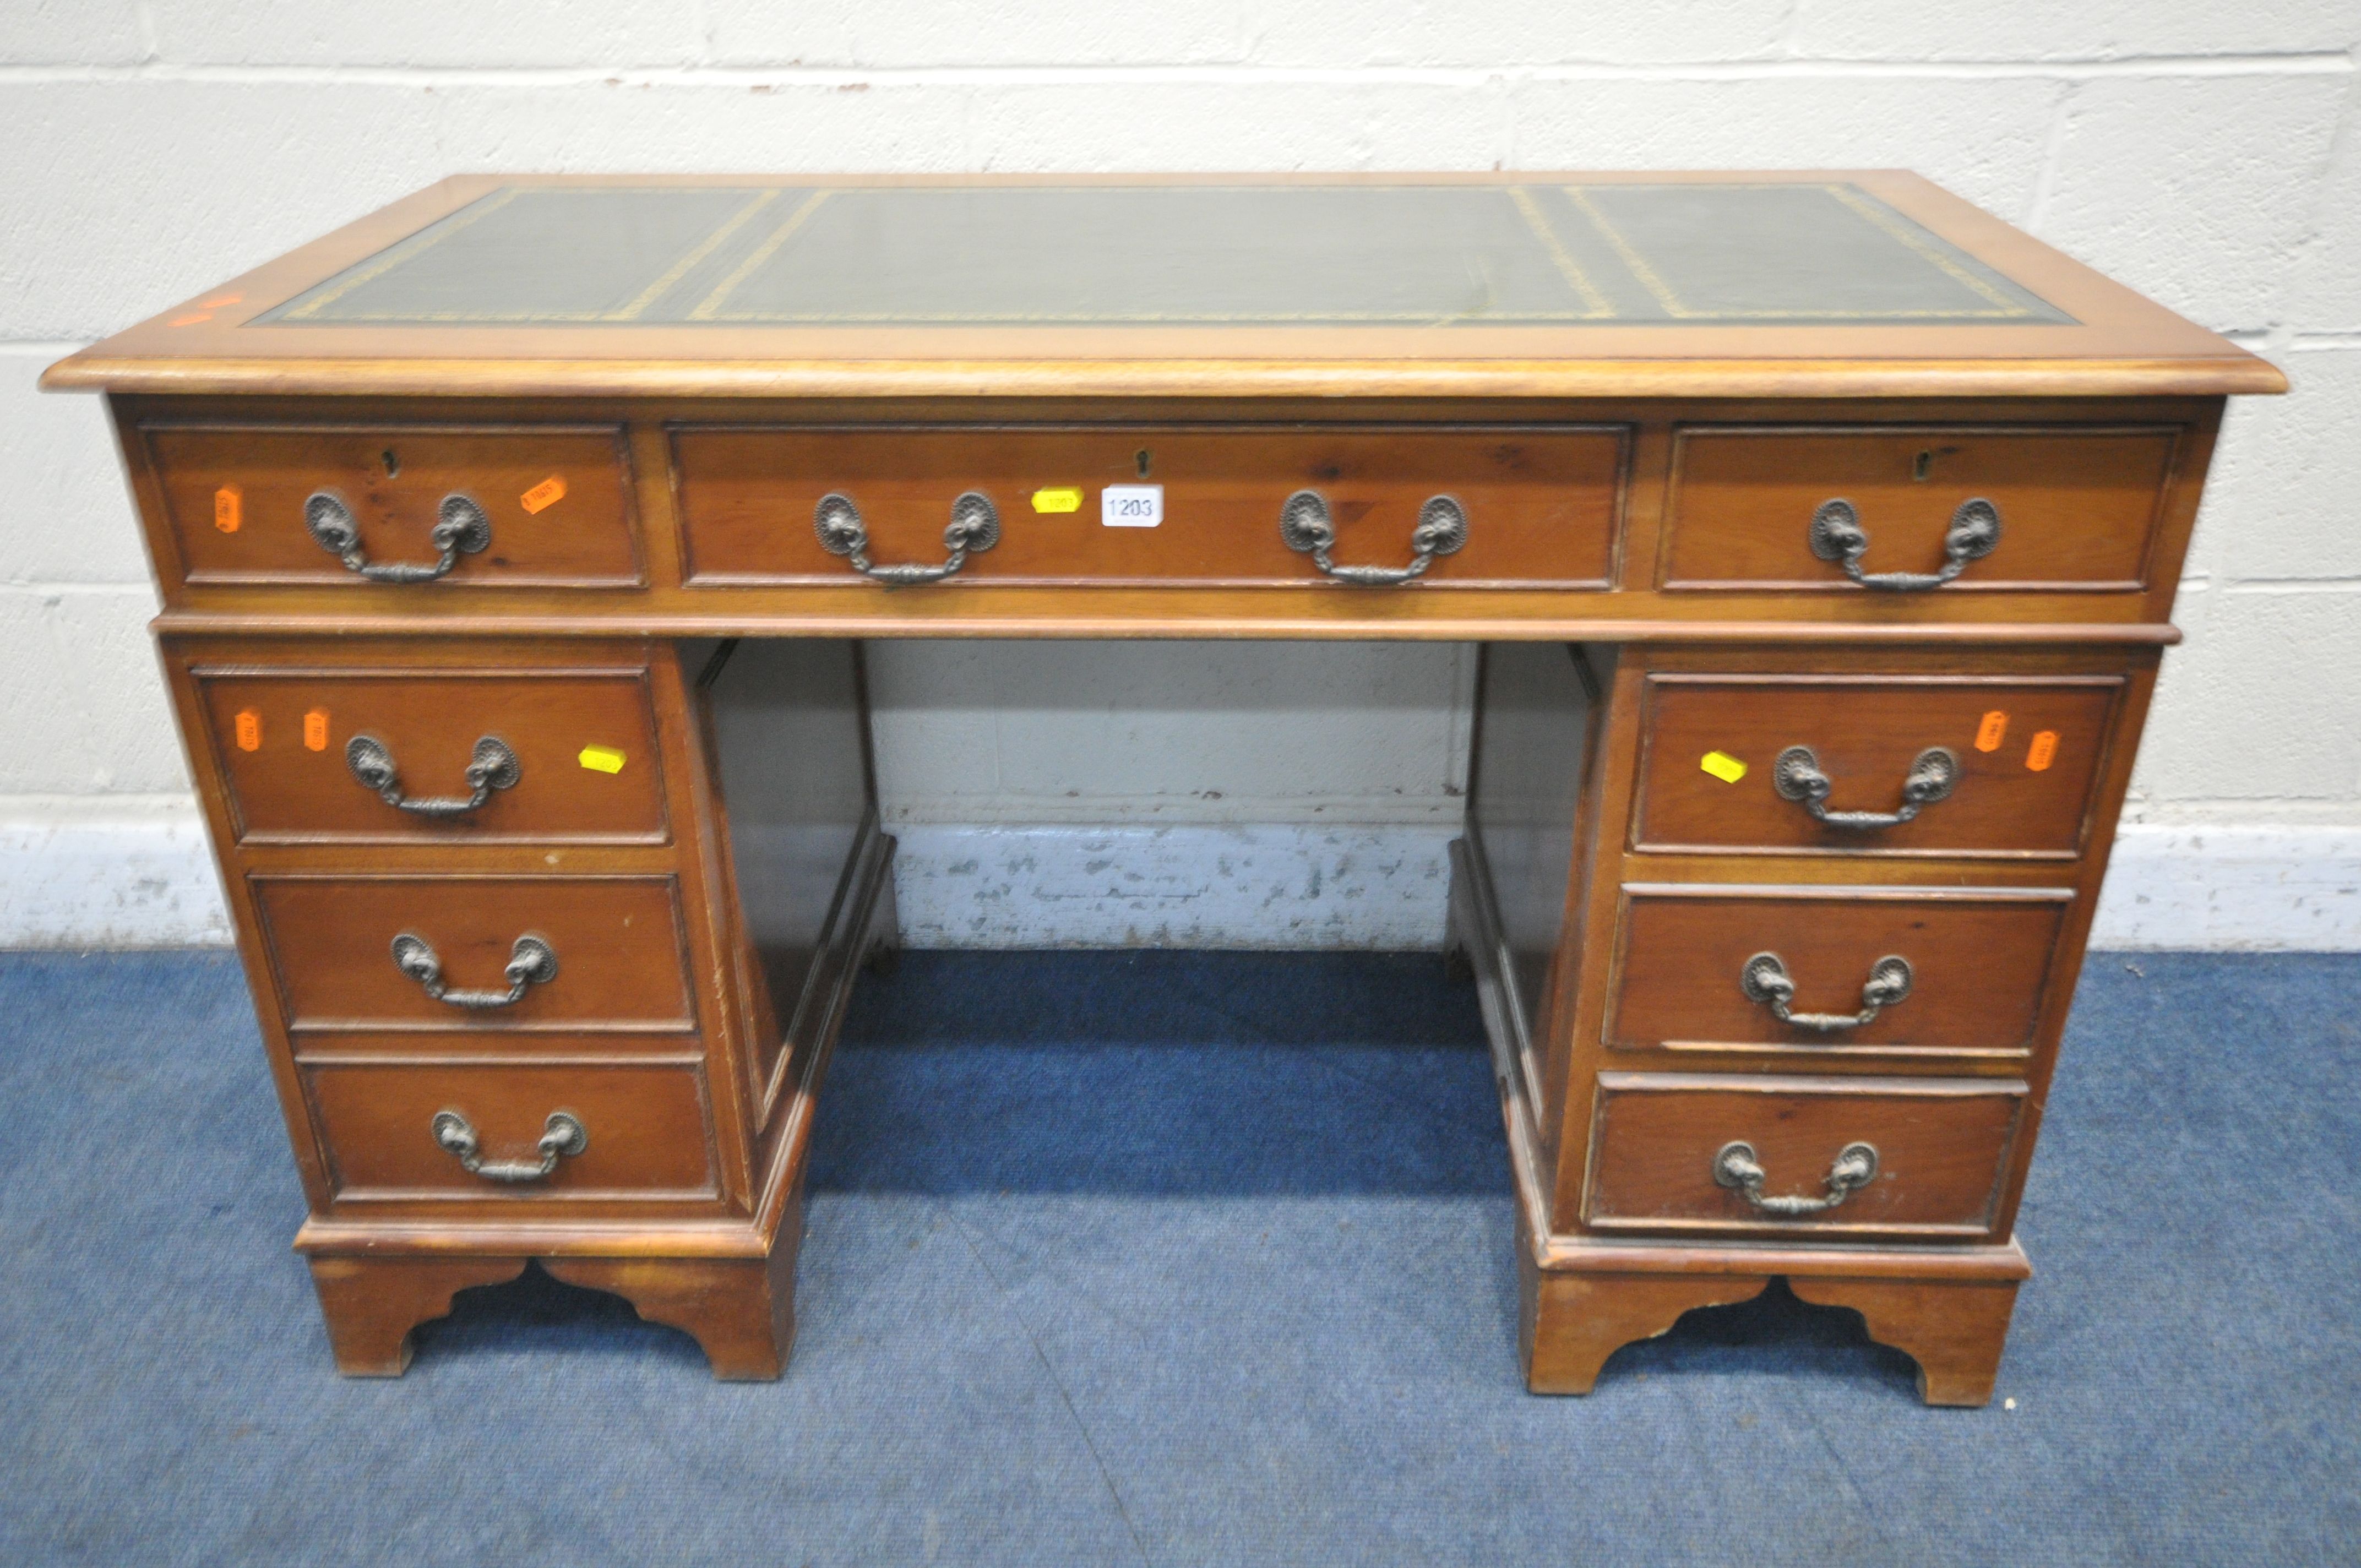 A 20TH CENTURY YEWWOOD TWIN PEDESTAL DESK, with a green tooled leather writing surface, fitted